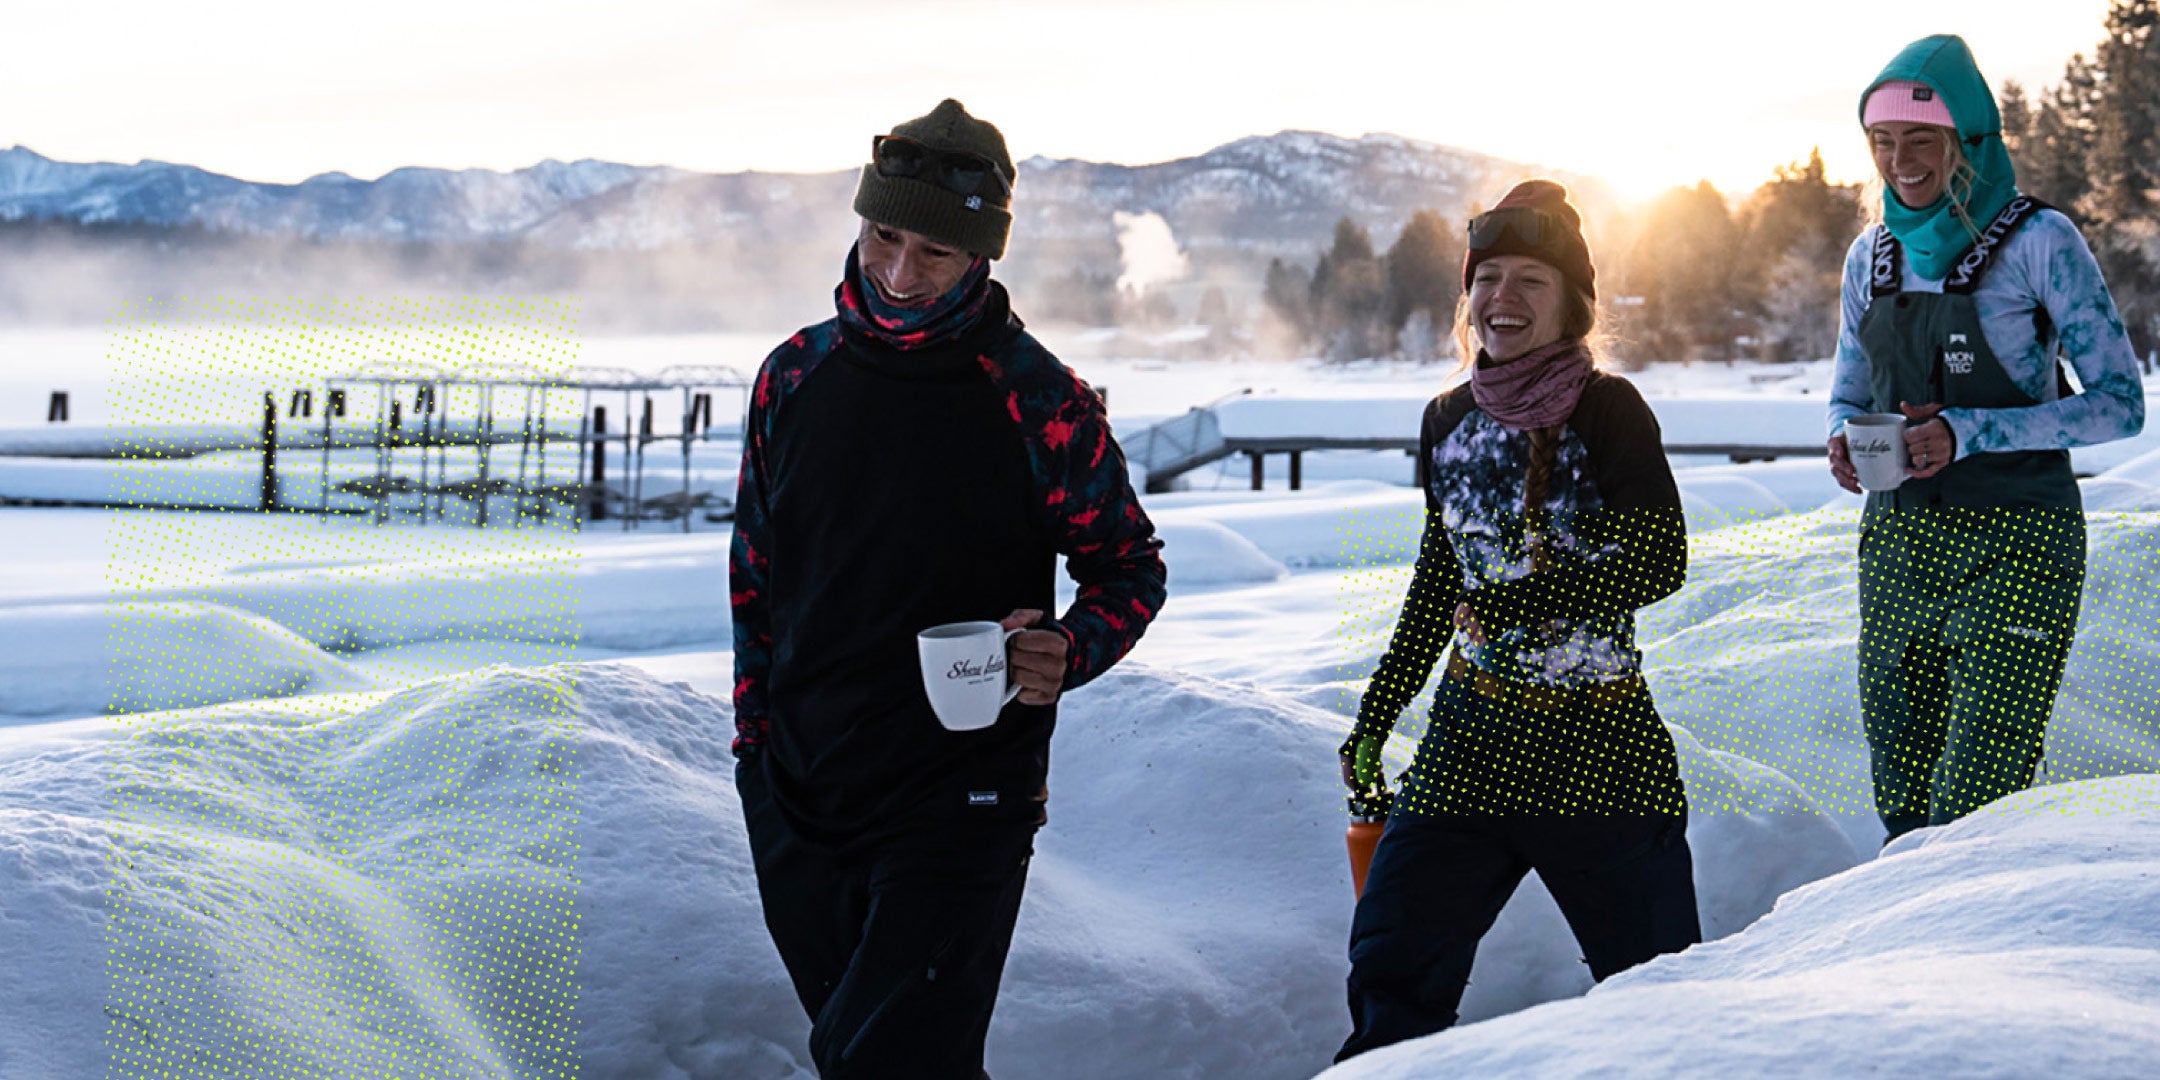 Gear up for Winter with Base Layers, Balaclavas, Neck Warmers, and Beanies